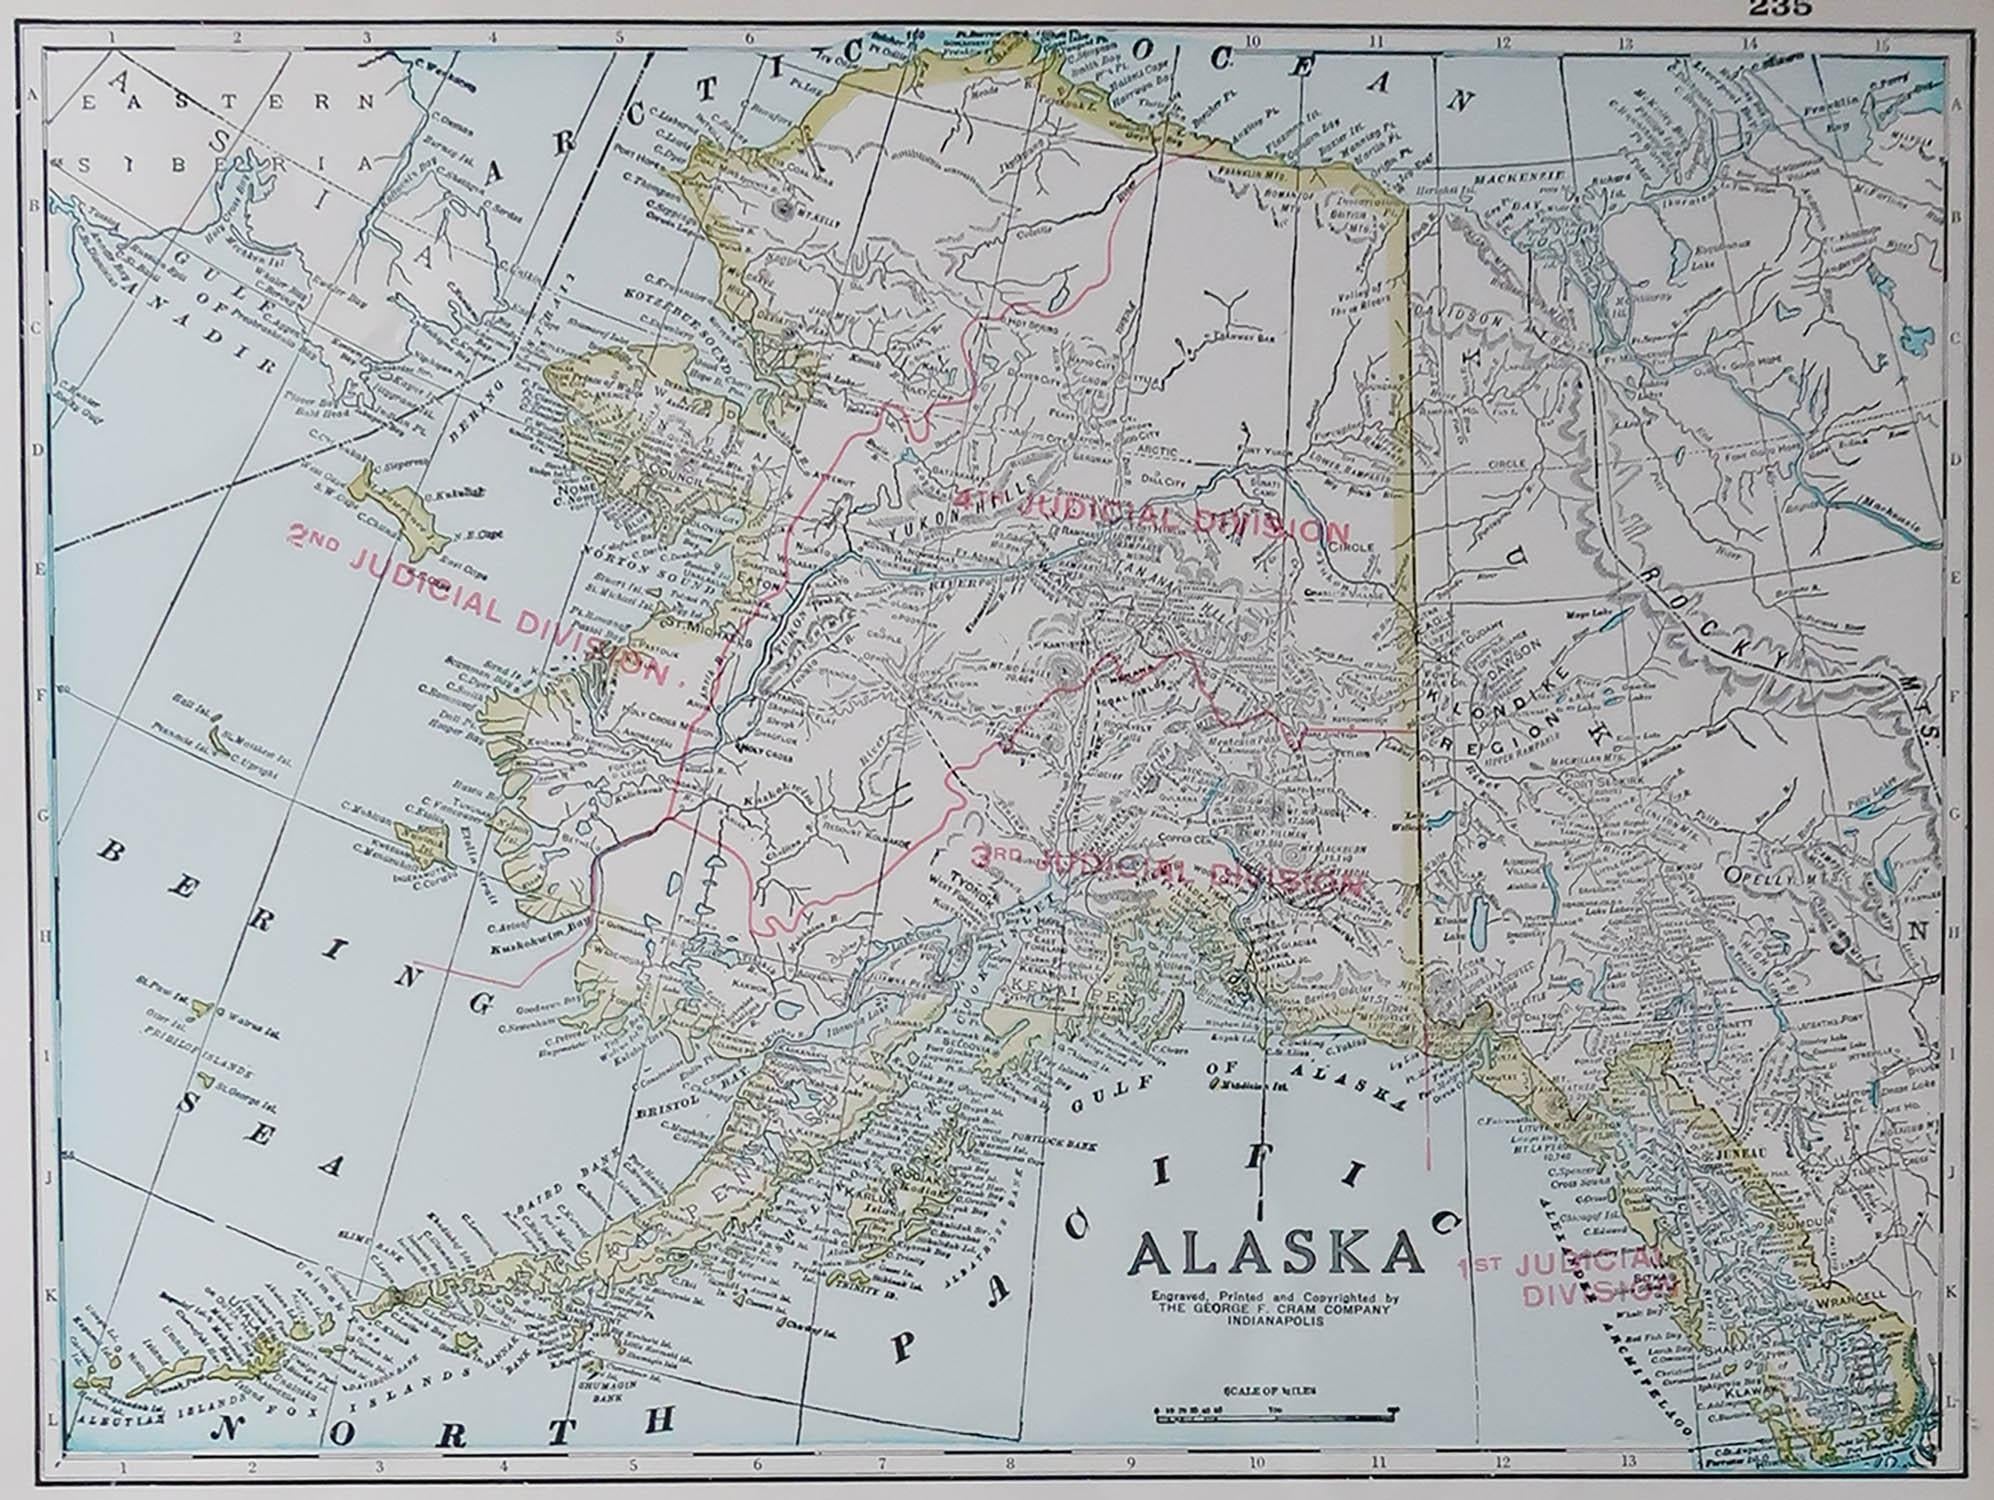 Fabulous map of Alaska

Original color

Engraved and printed by the George F. Cram Company, Indianapolis.

Published, C.1900

Unframed

Free shipping.